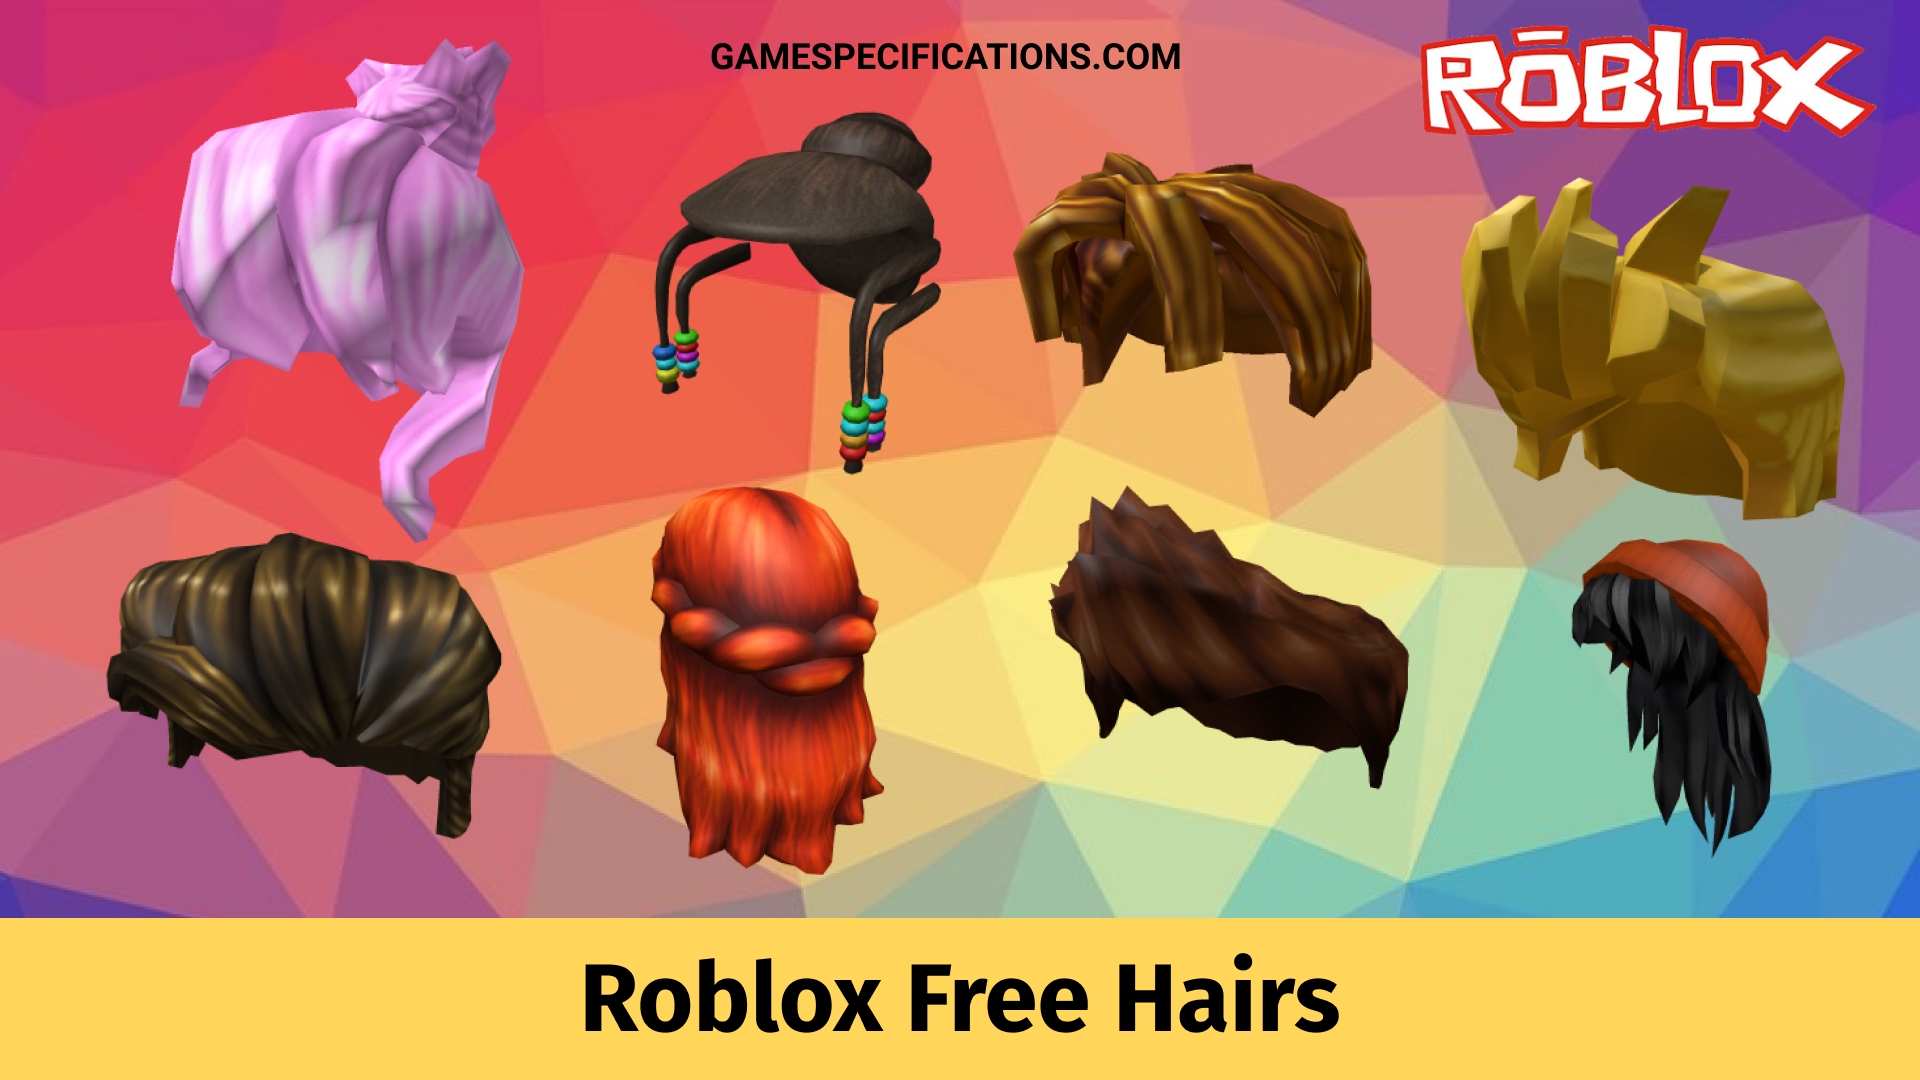 Roblox Free Hairs For Awesome Aesthetics Game Specifications - all free hair roblox